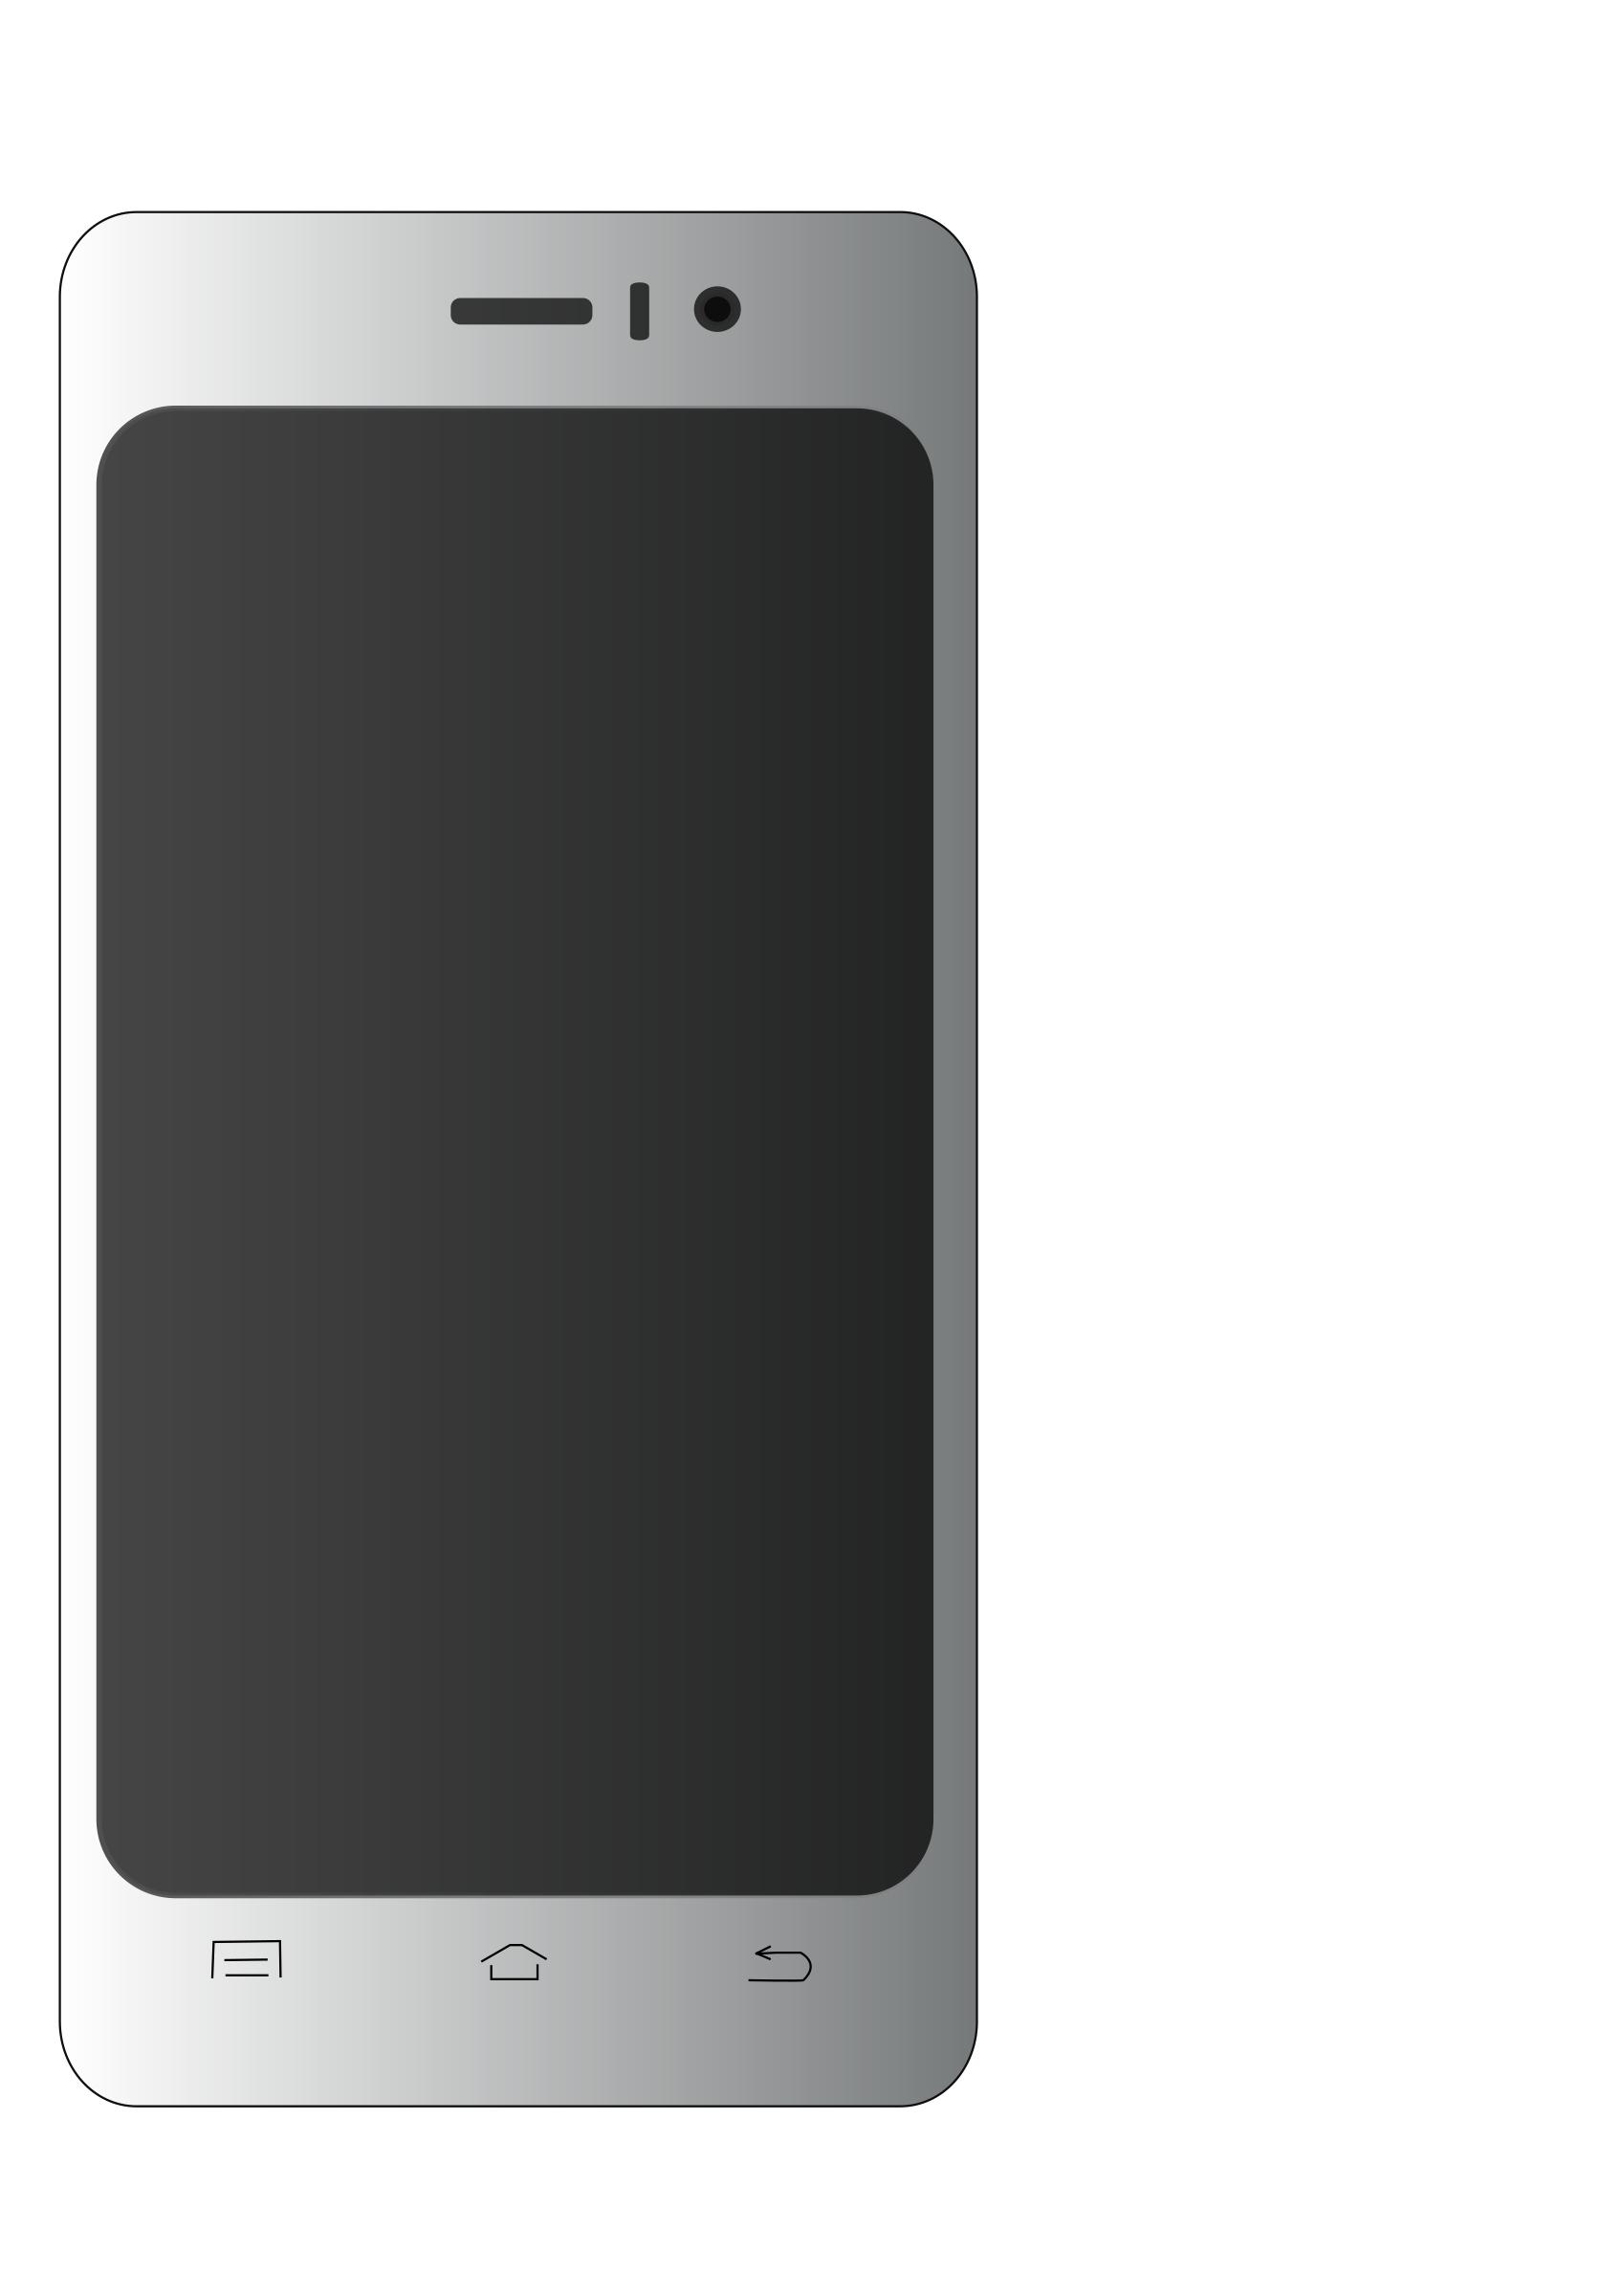 Unbranded mobile phone - smartphone png